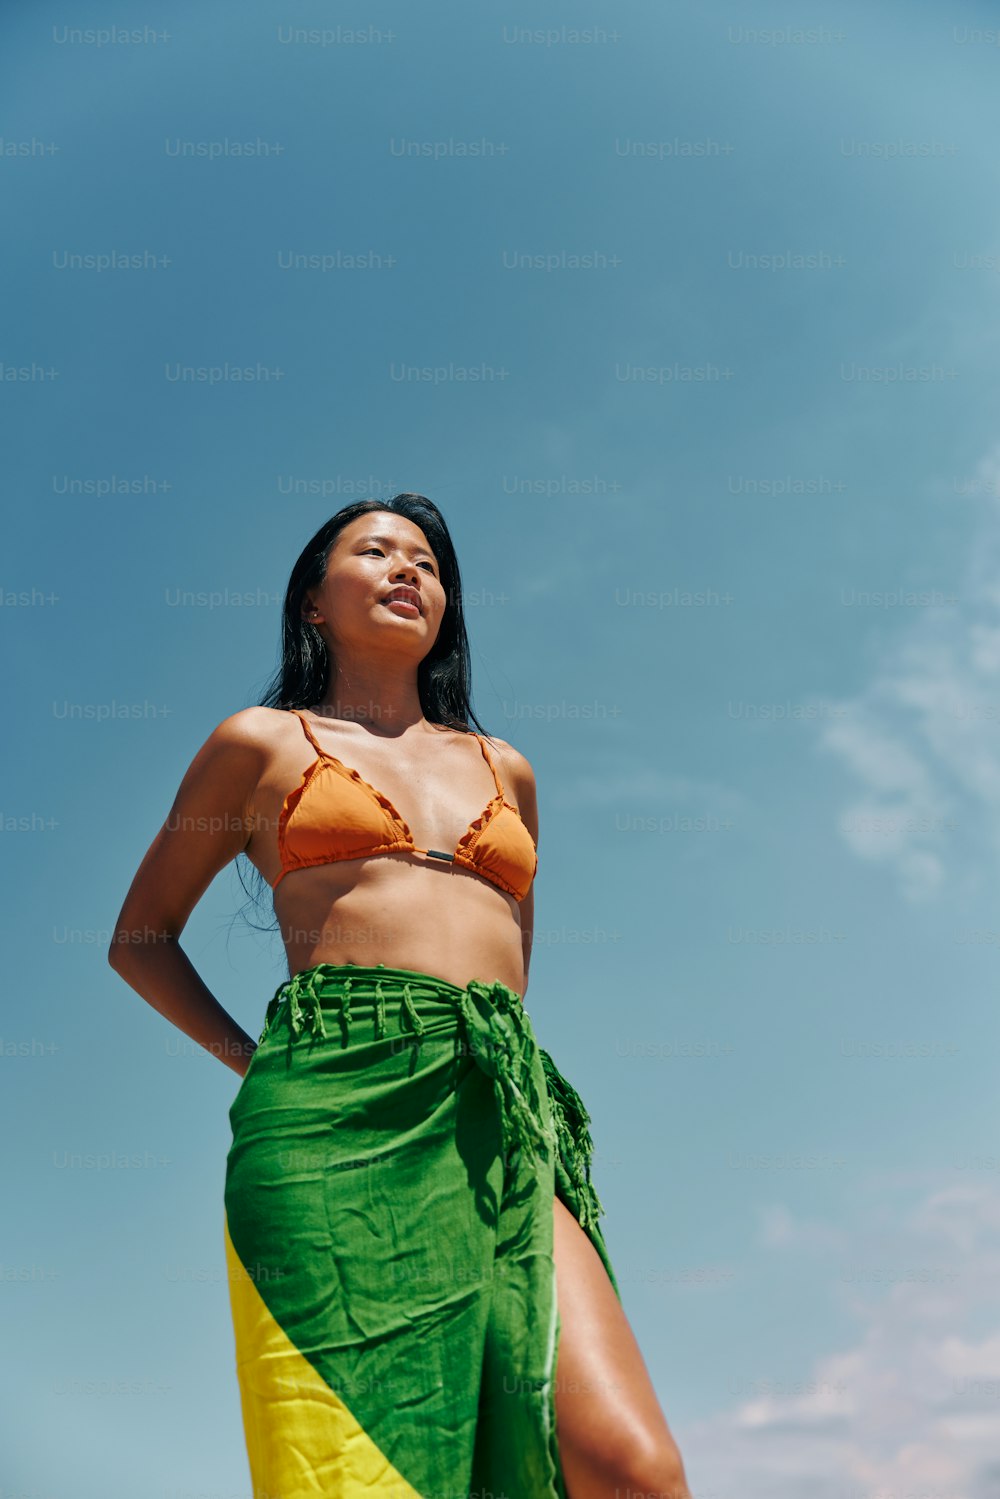 a woman in a bikini top and green and yellow skirt